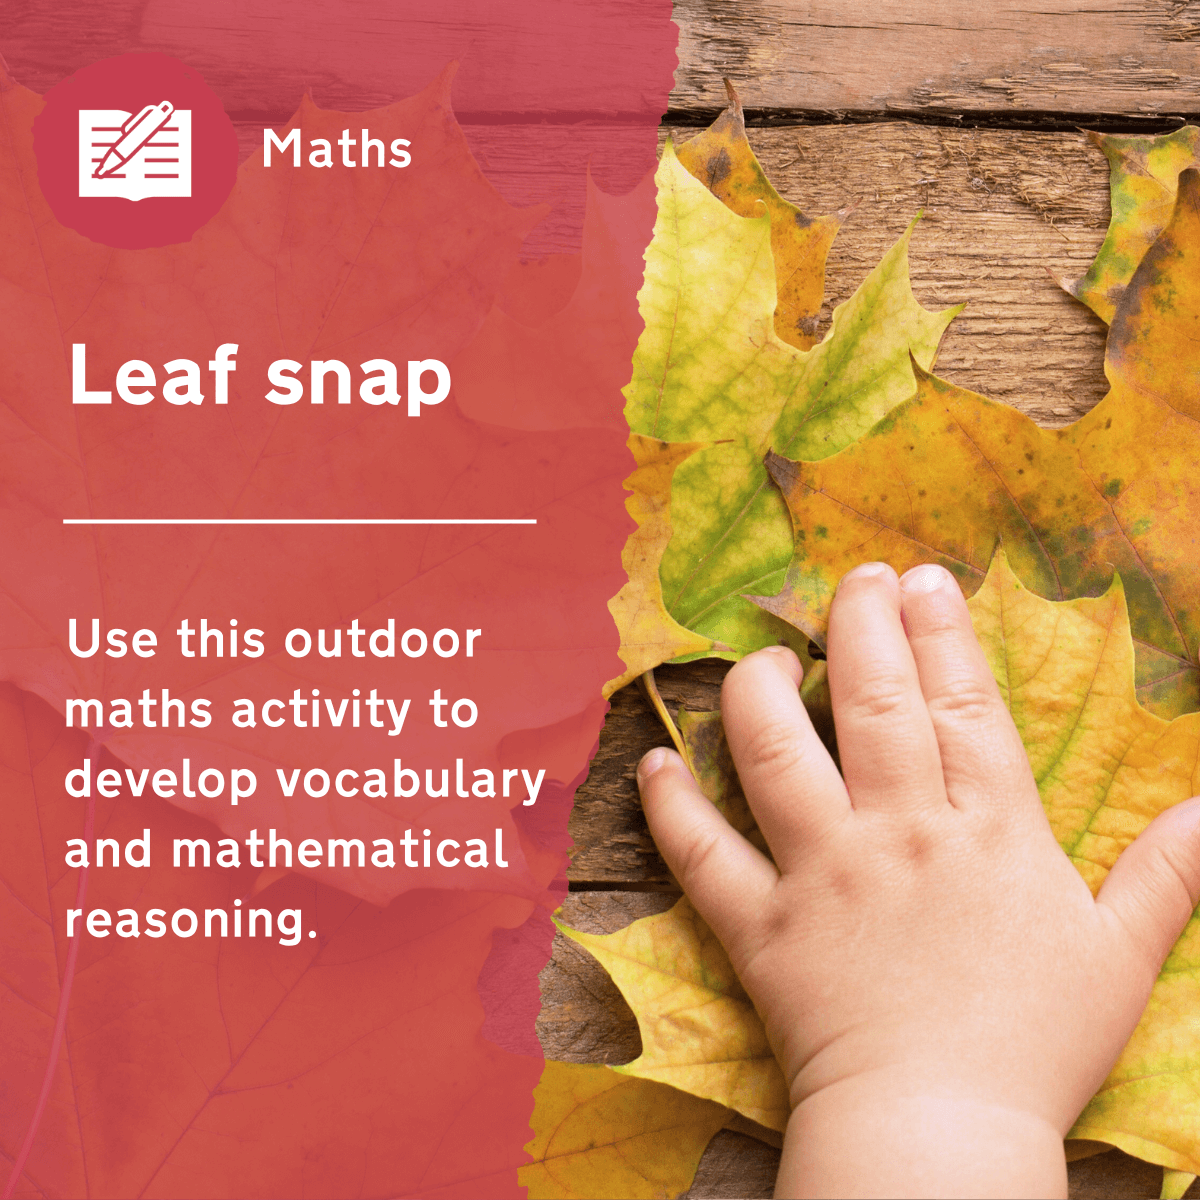 Use this early years maths activity to develop vocabulary and the early stages of mathematical reasoning. This outdoor lesson idea will encourage communication through a fun game, while also connecting children with nature around them.